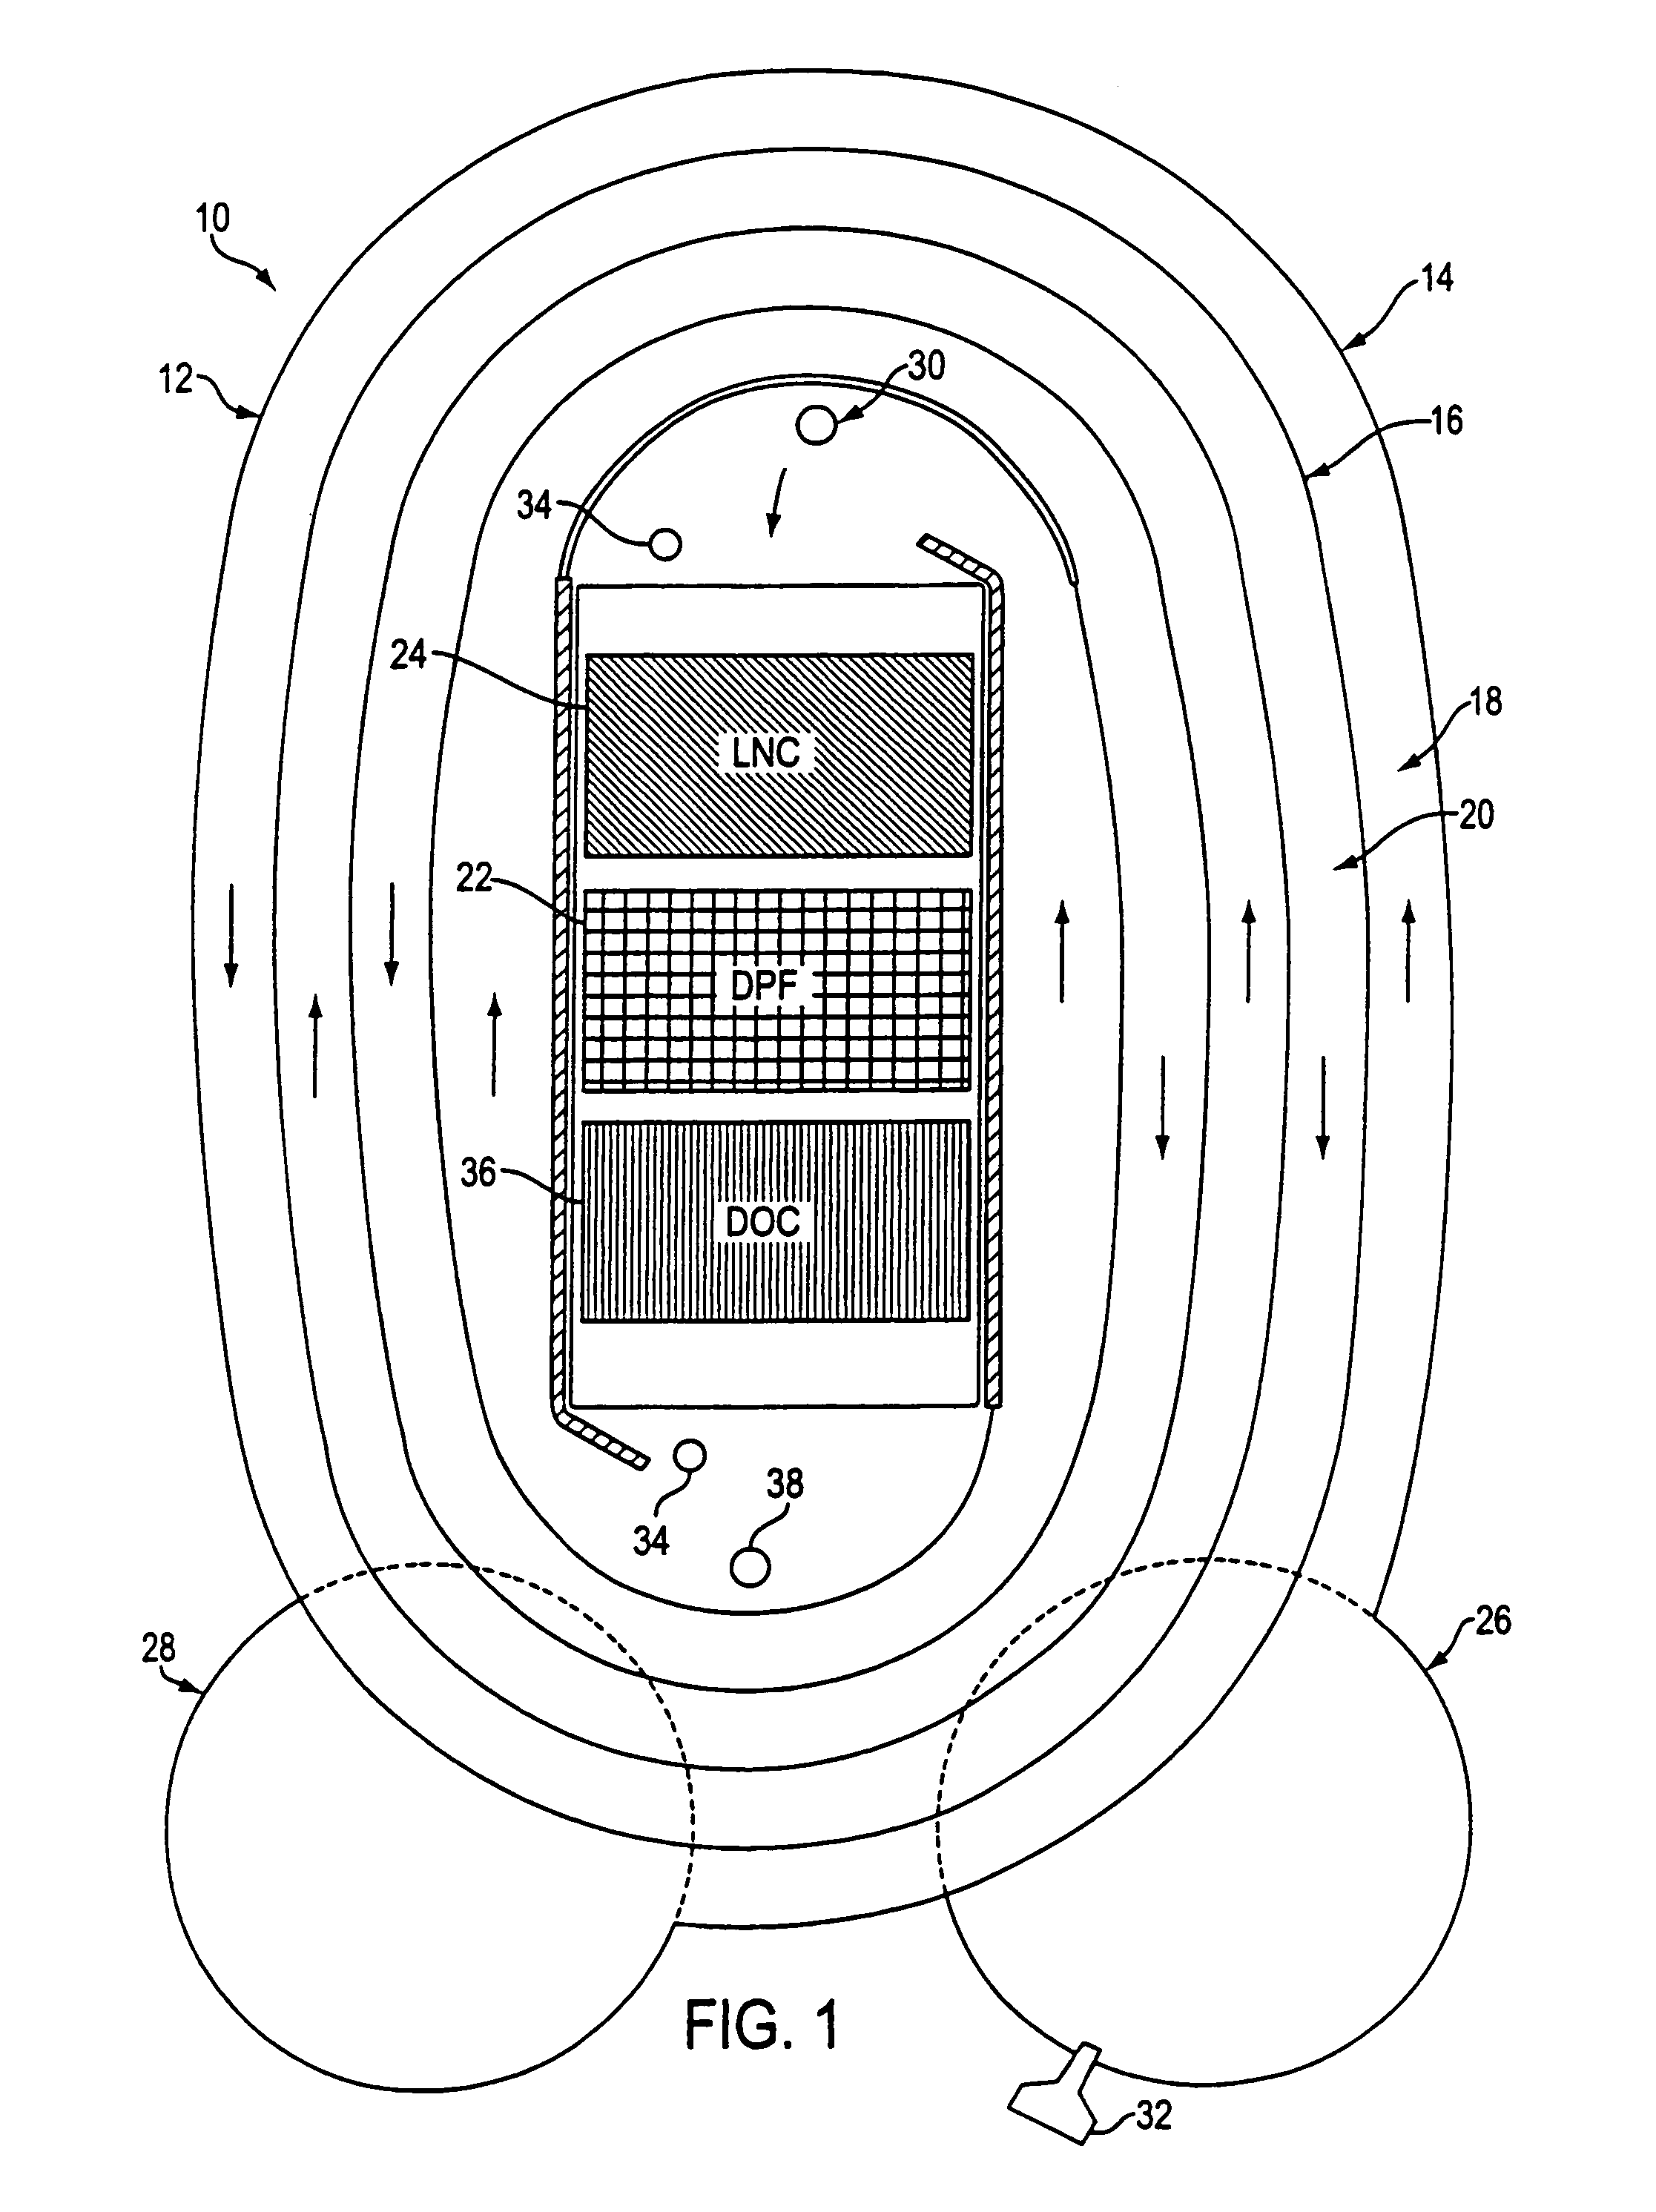 Integrated apparatus for removing pollutants from a fluid stream in a lean-burn environment with heat recovery